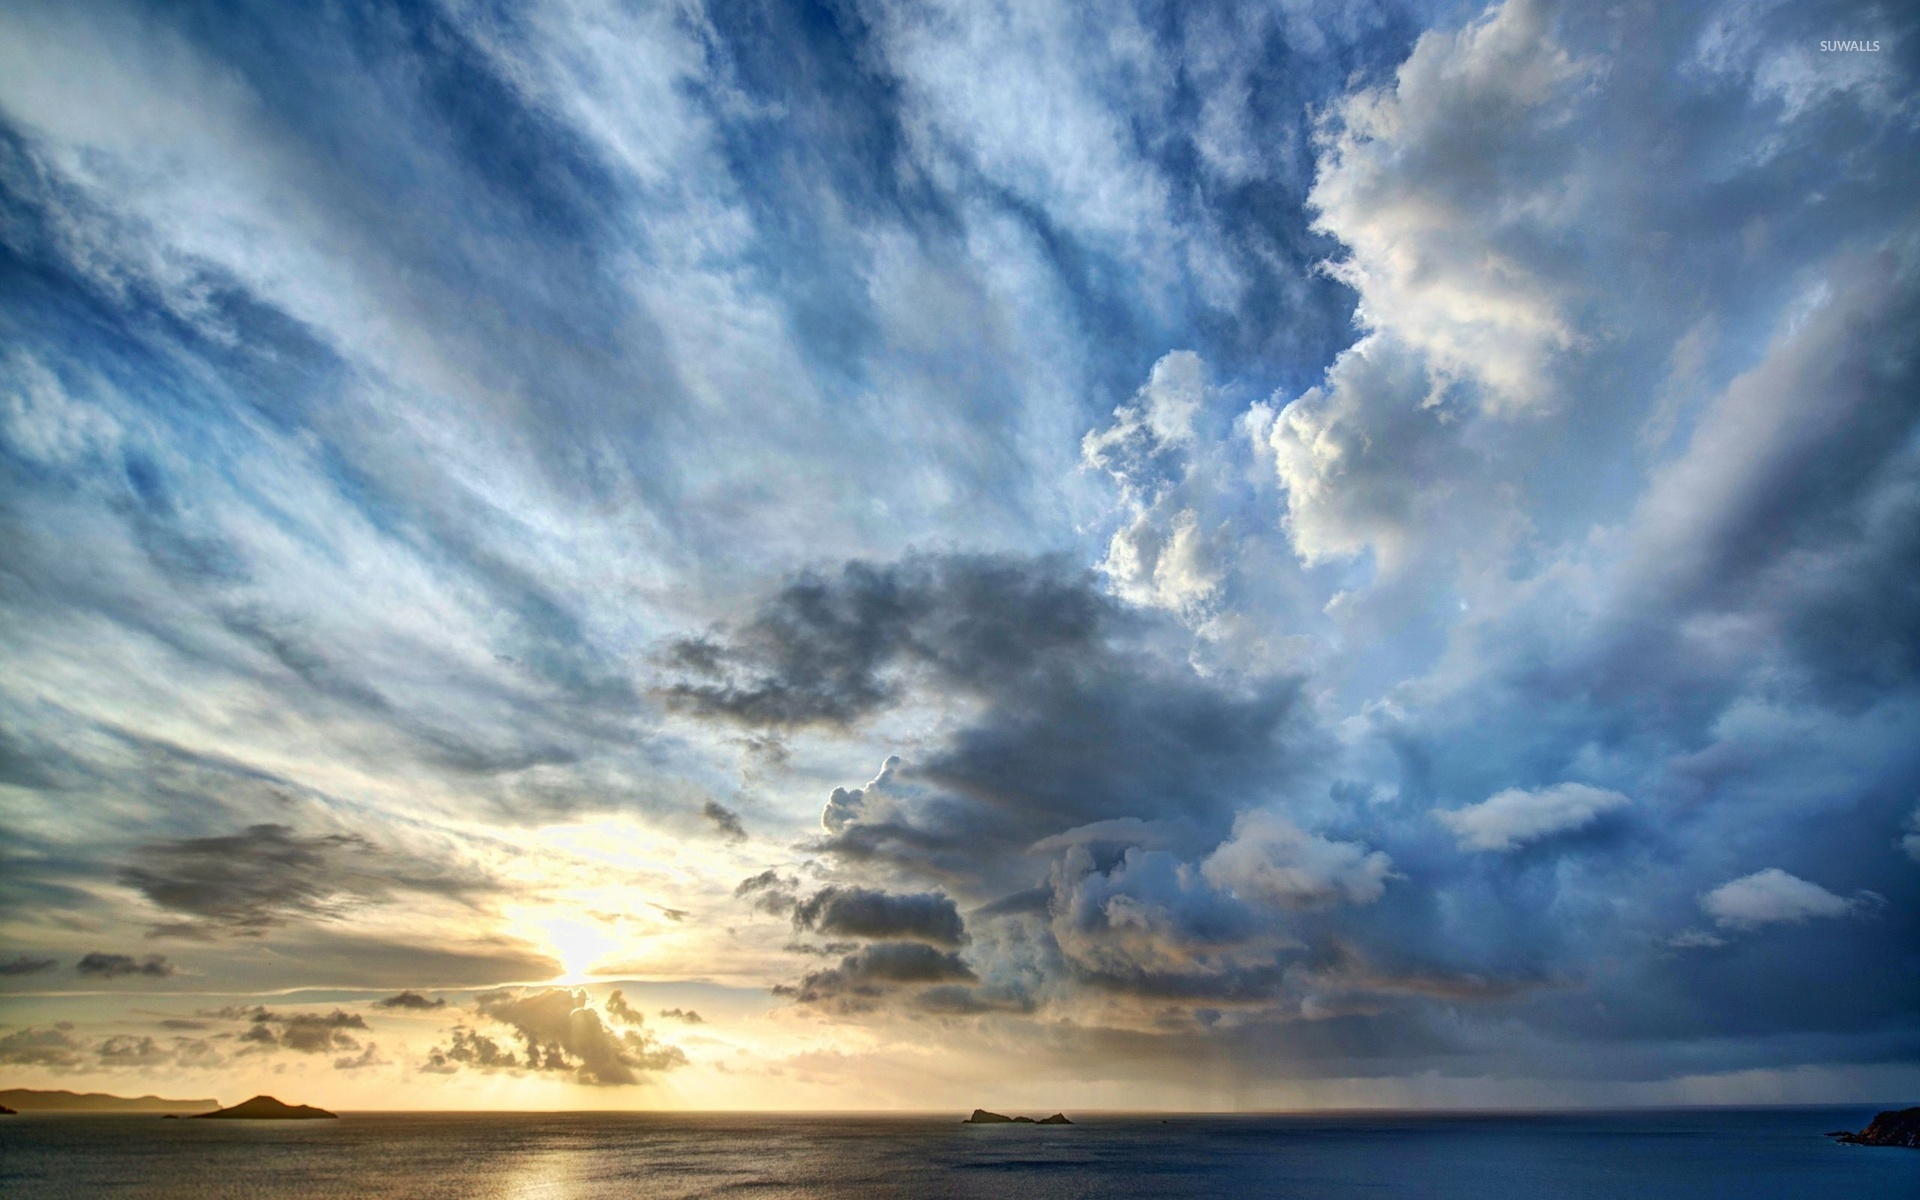 Stormy clouds above the ocean at sunset wallpaper - Beach wallpapers ...